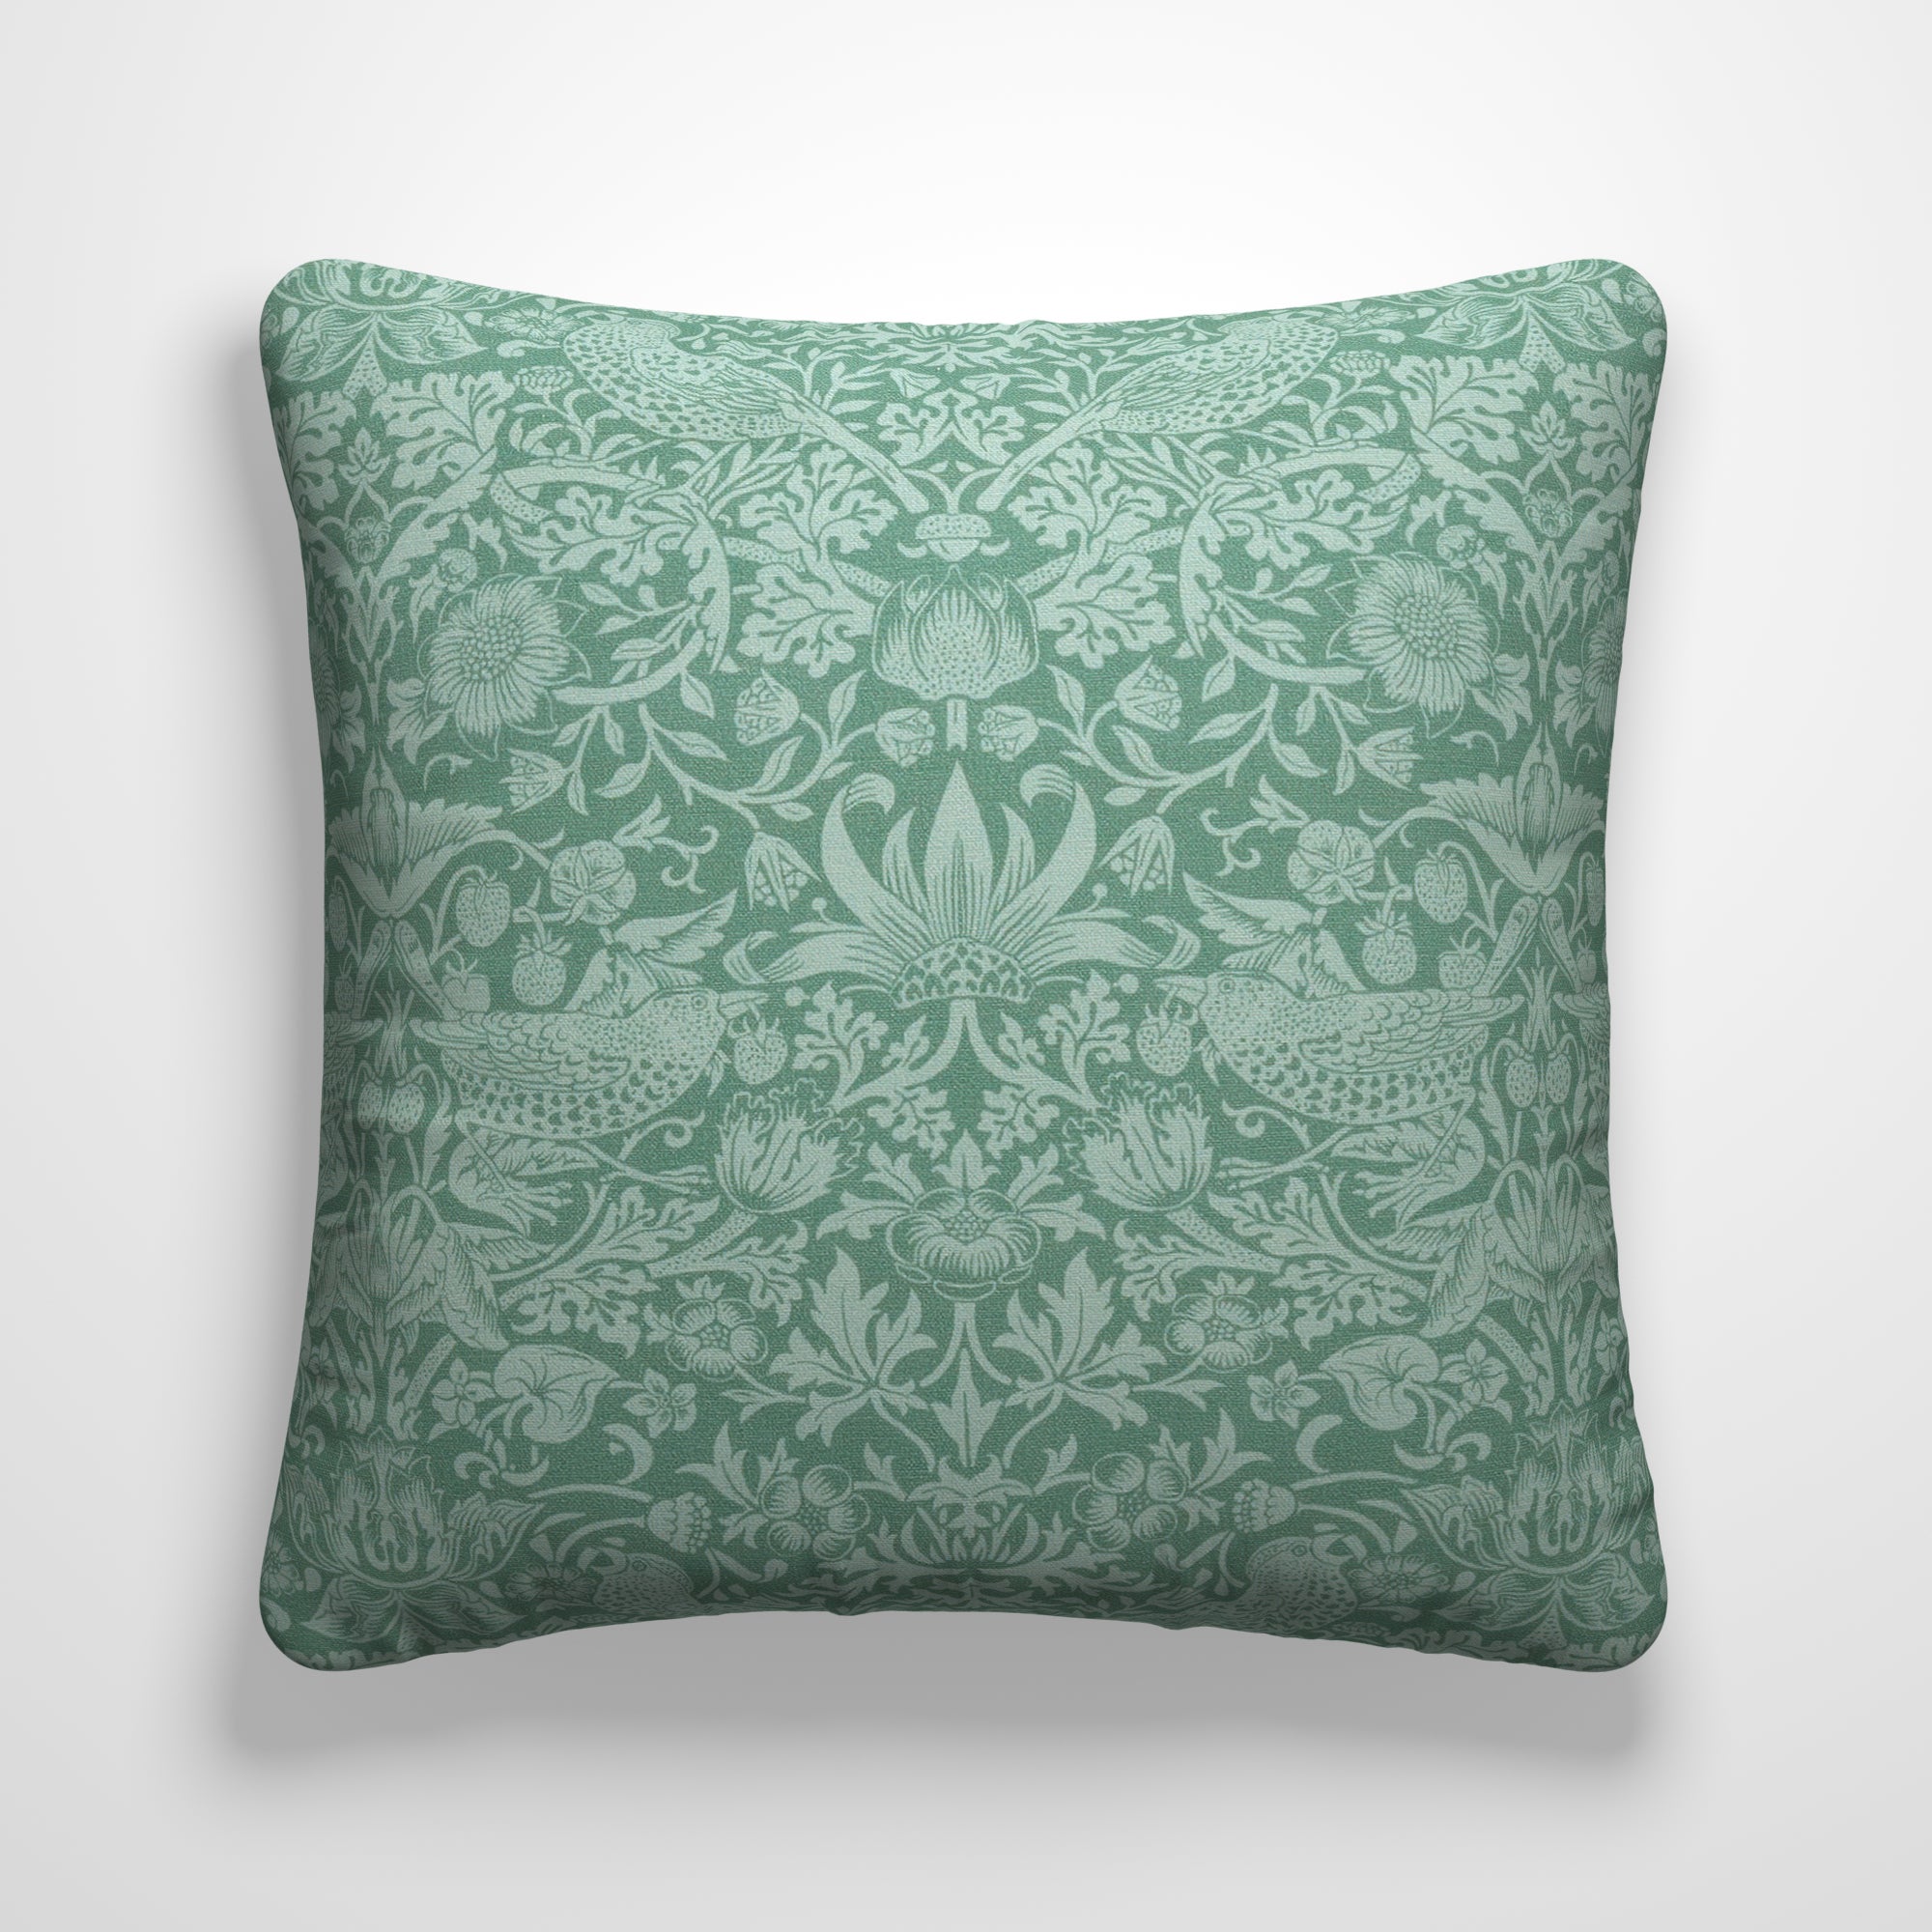 William Morris At Home Strawberry Thief Tonal Made To Order Cushion Cover Strawberry Thief Tonal Riviera